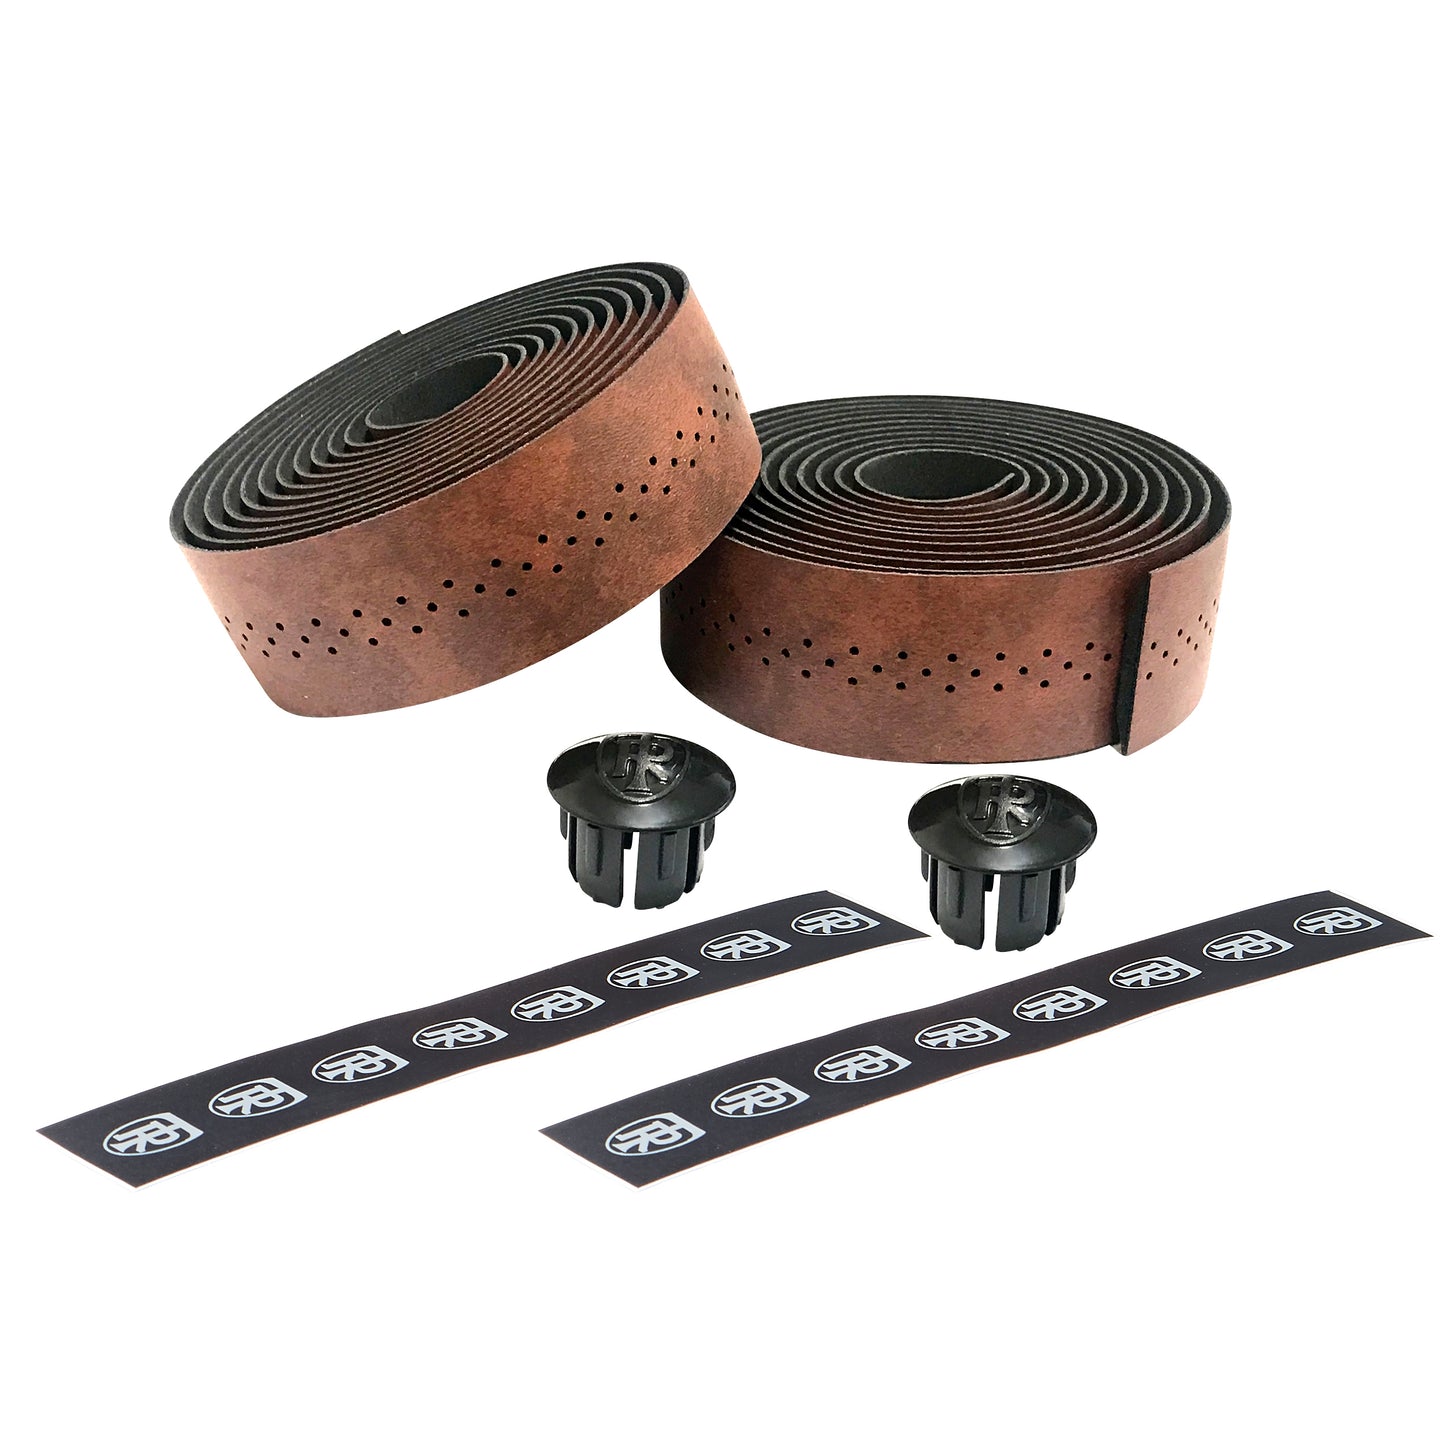 NEW Ritchey Classic Road Bar Tape, Brown